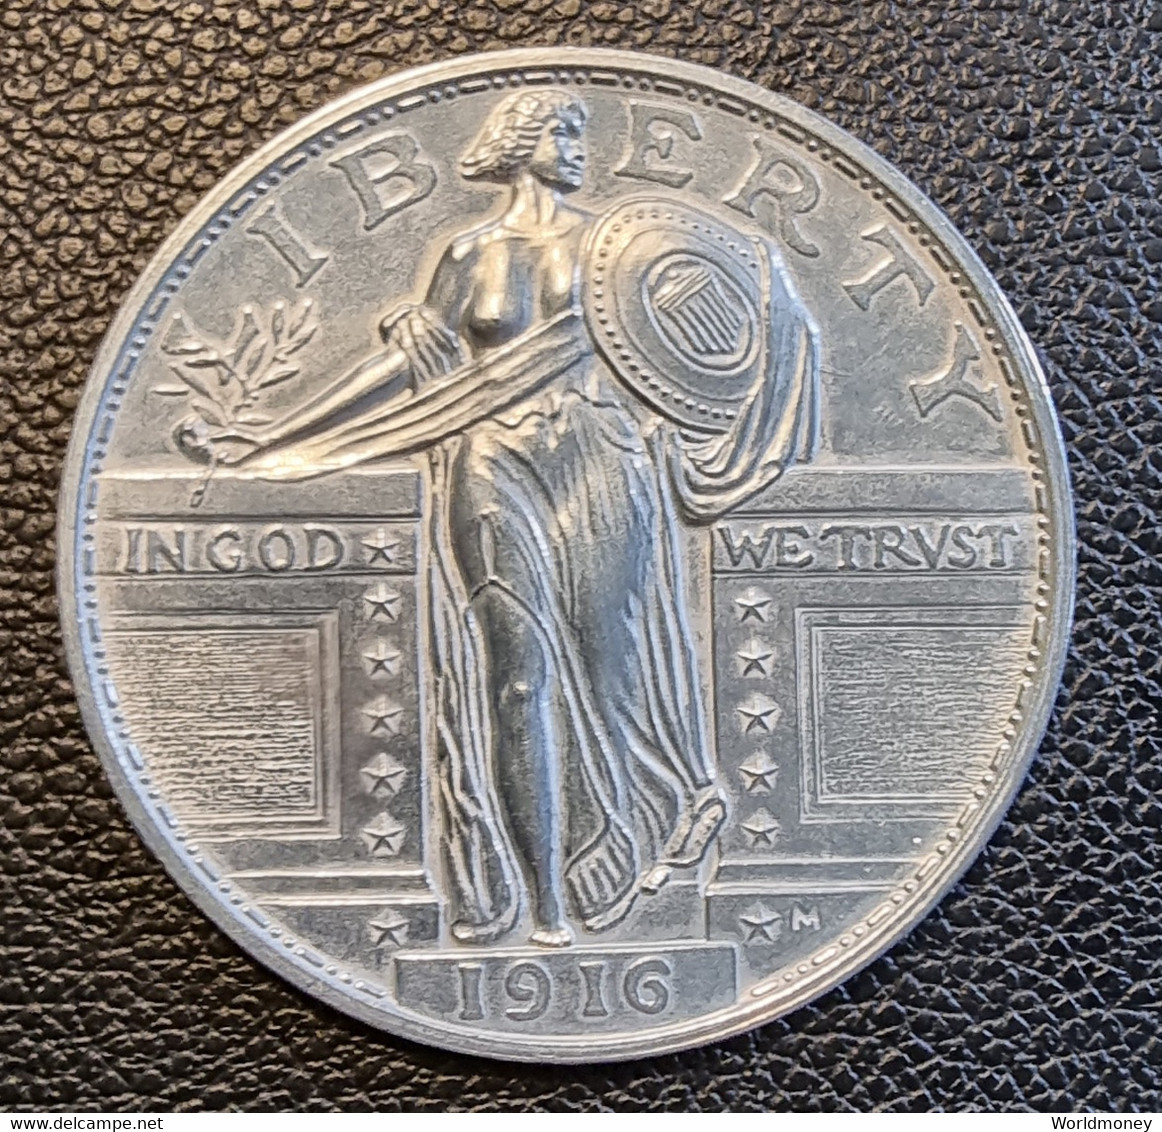 USA - ‘1916 Standing Liberty ¼ Dollar’ Commemorative Coin - Elongated Coins